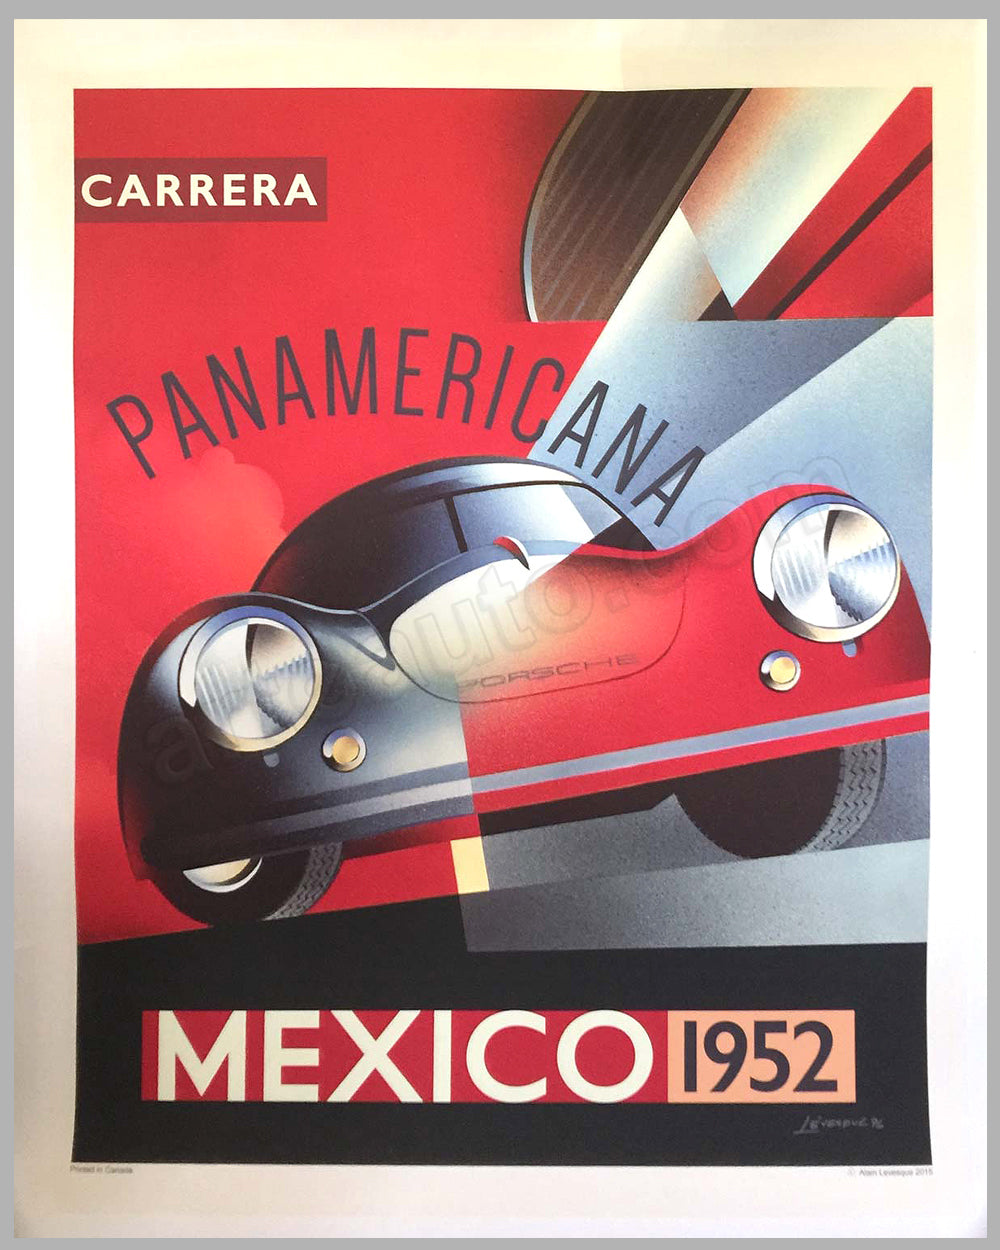 Carrera Panamericana Mexico 1952 Porsche poster by Alain Levesque <p><em><span style="color: #ff2a00;"><strong>Temporarily Out of Stock</strong><br></span></em>$650.00</p>